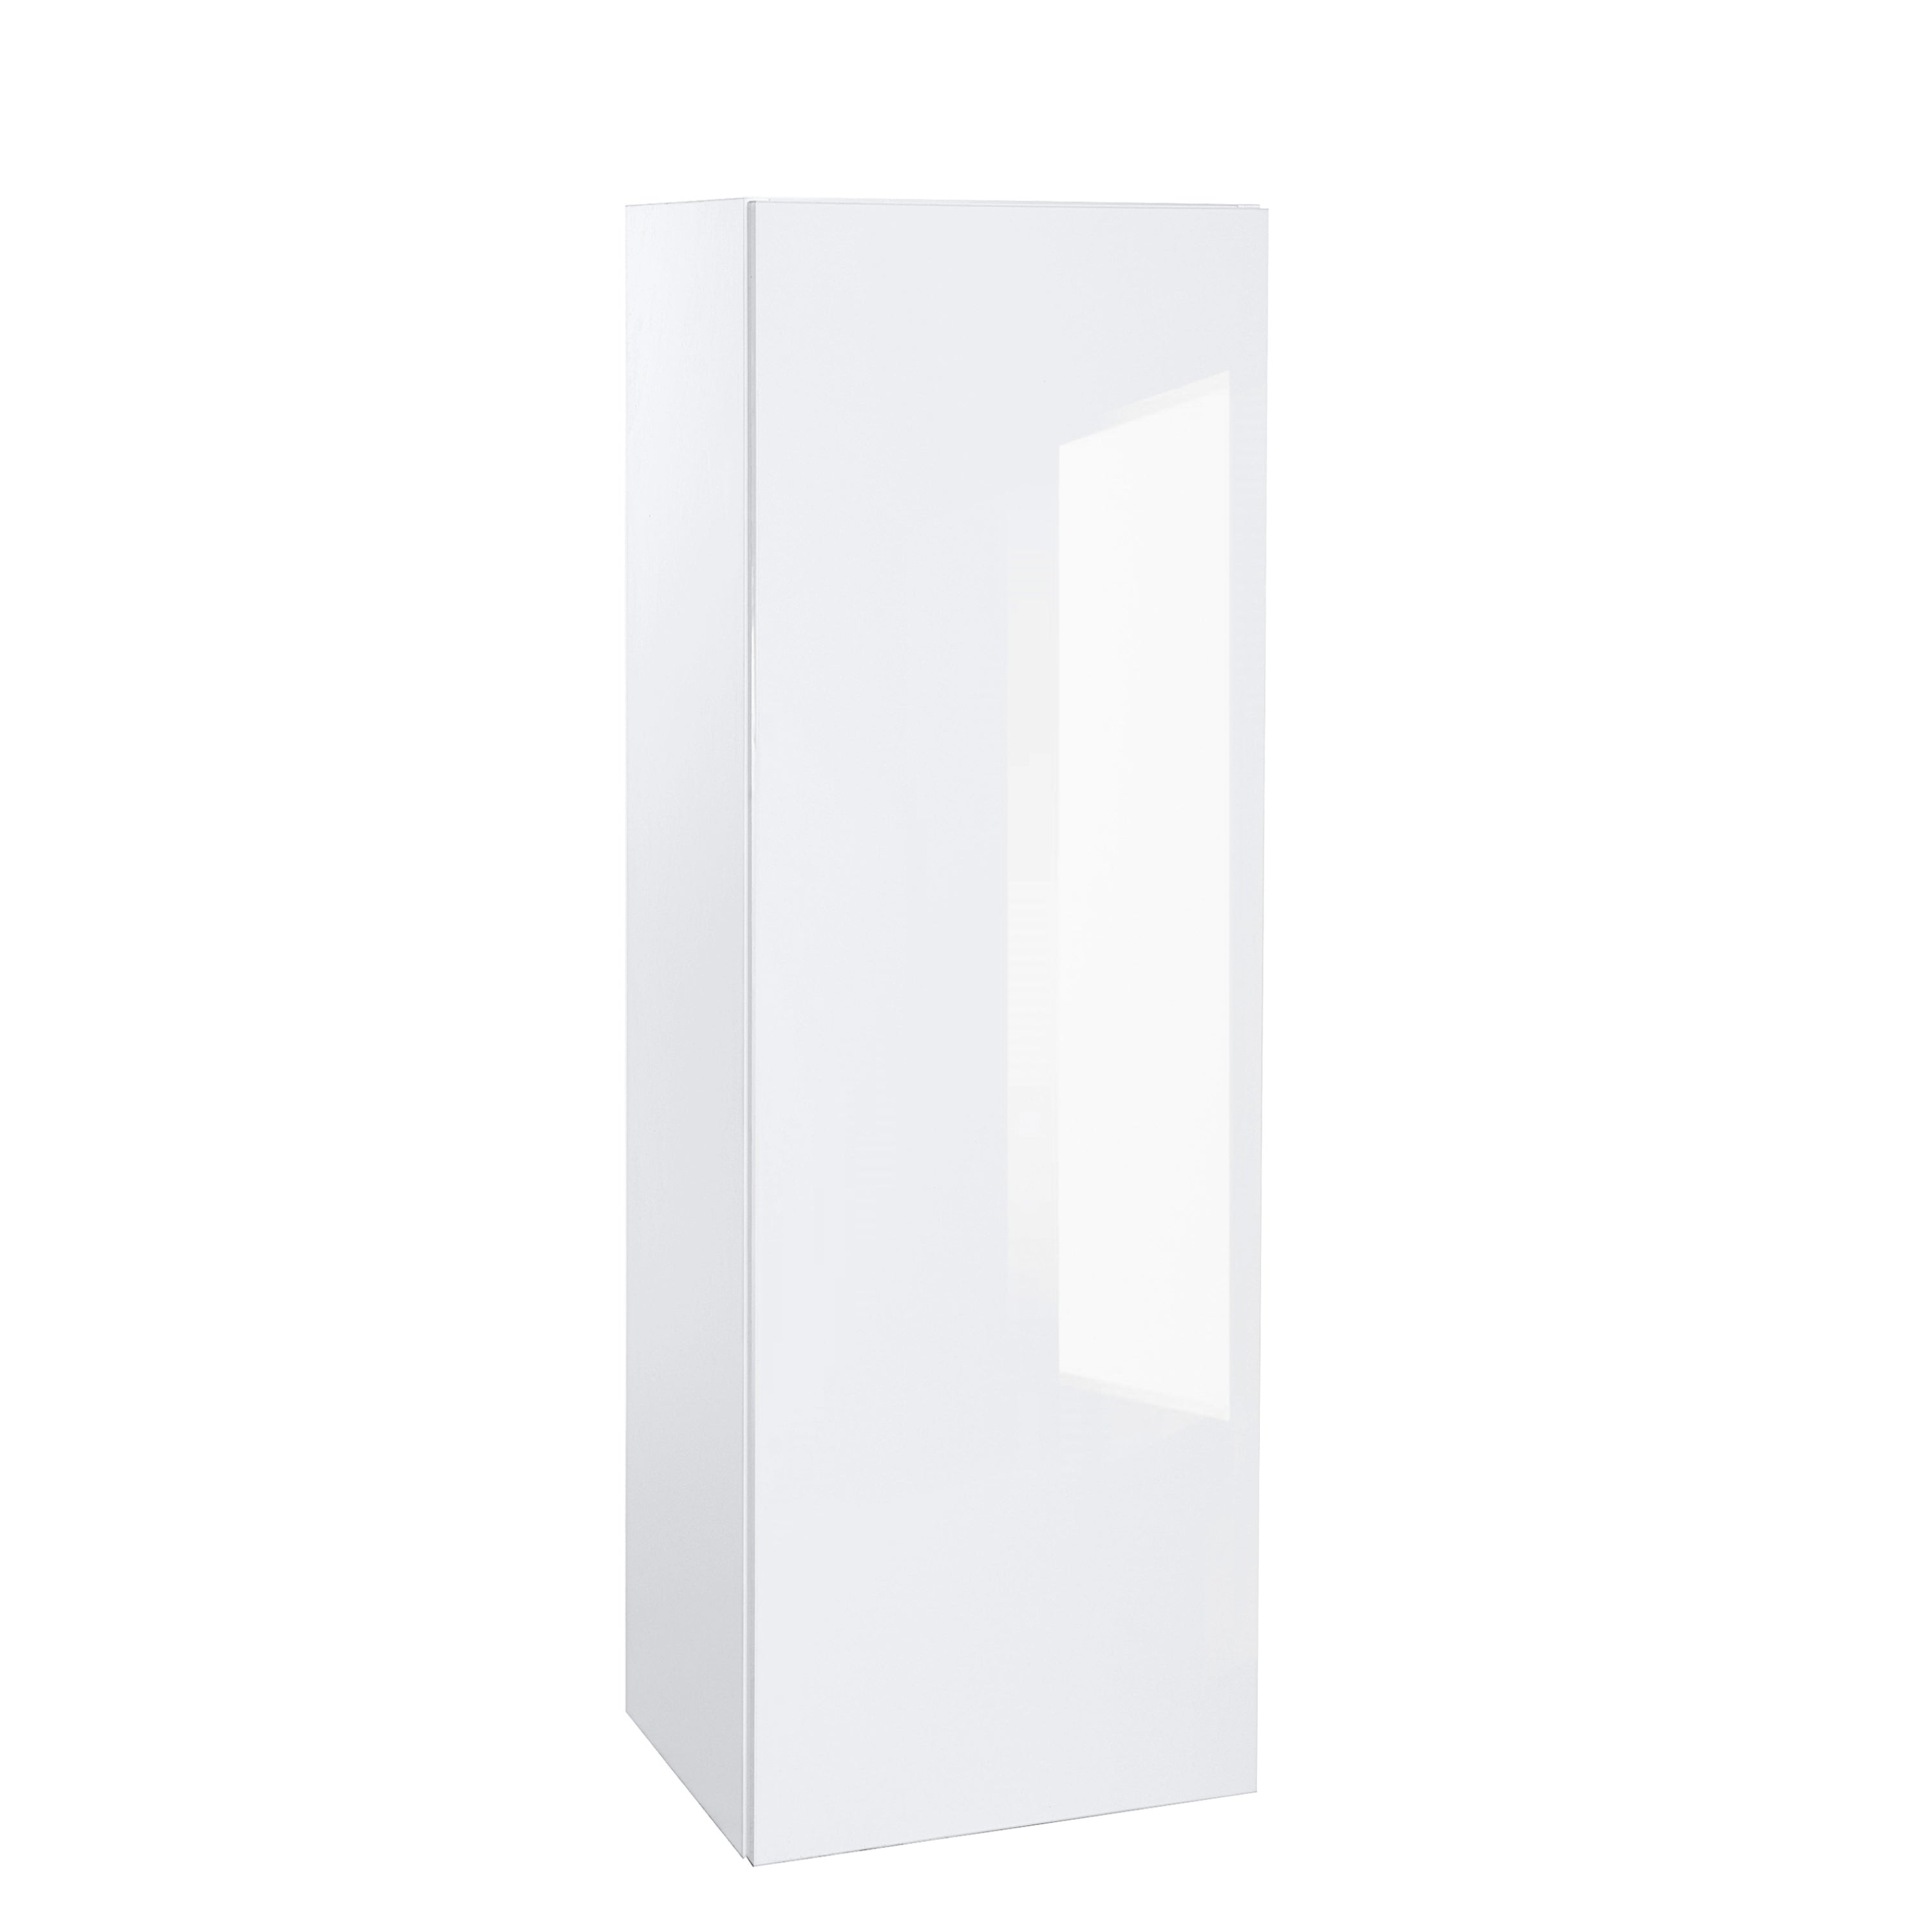 Quick Assemble Modern Style with Soft Close, 12 in White Gloss Wall Kitchen Cabinet (12 in W x 12 D x 36 in H) -  Pro-Edge HD